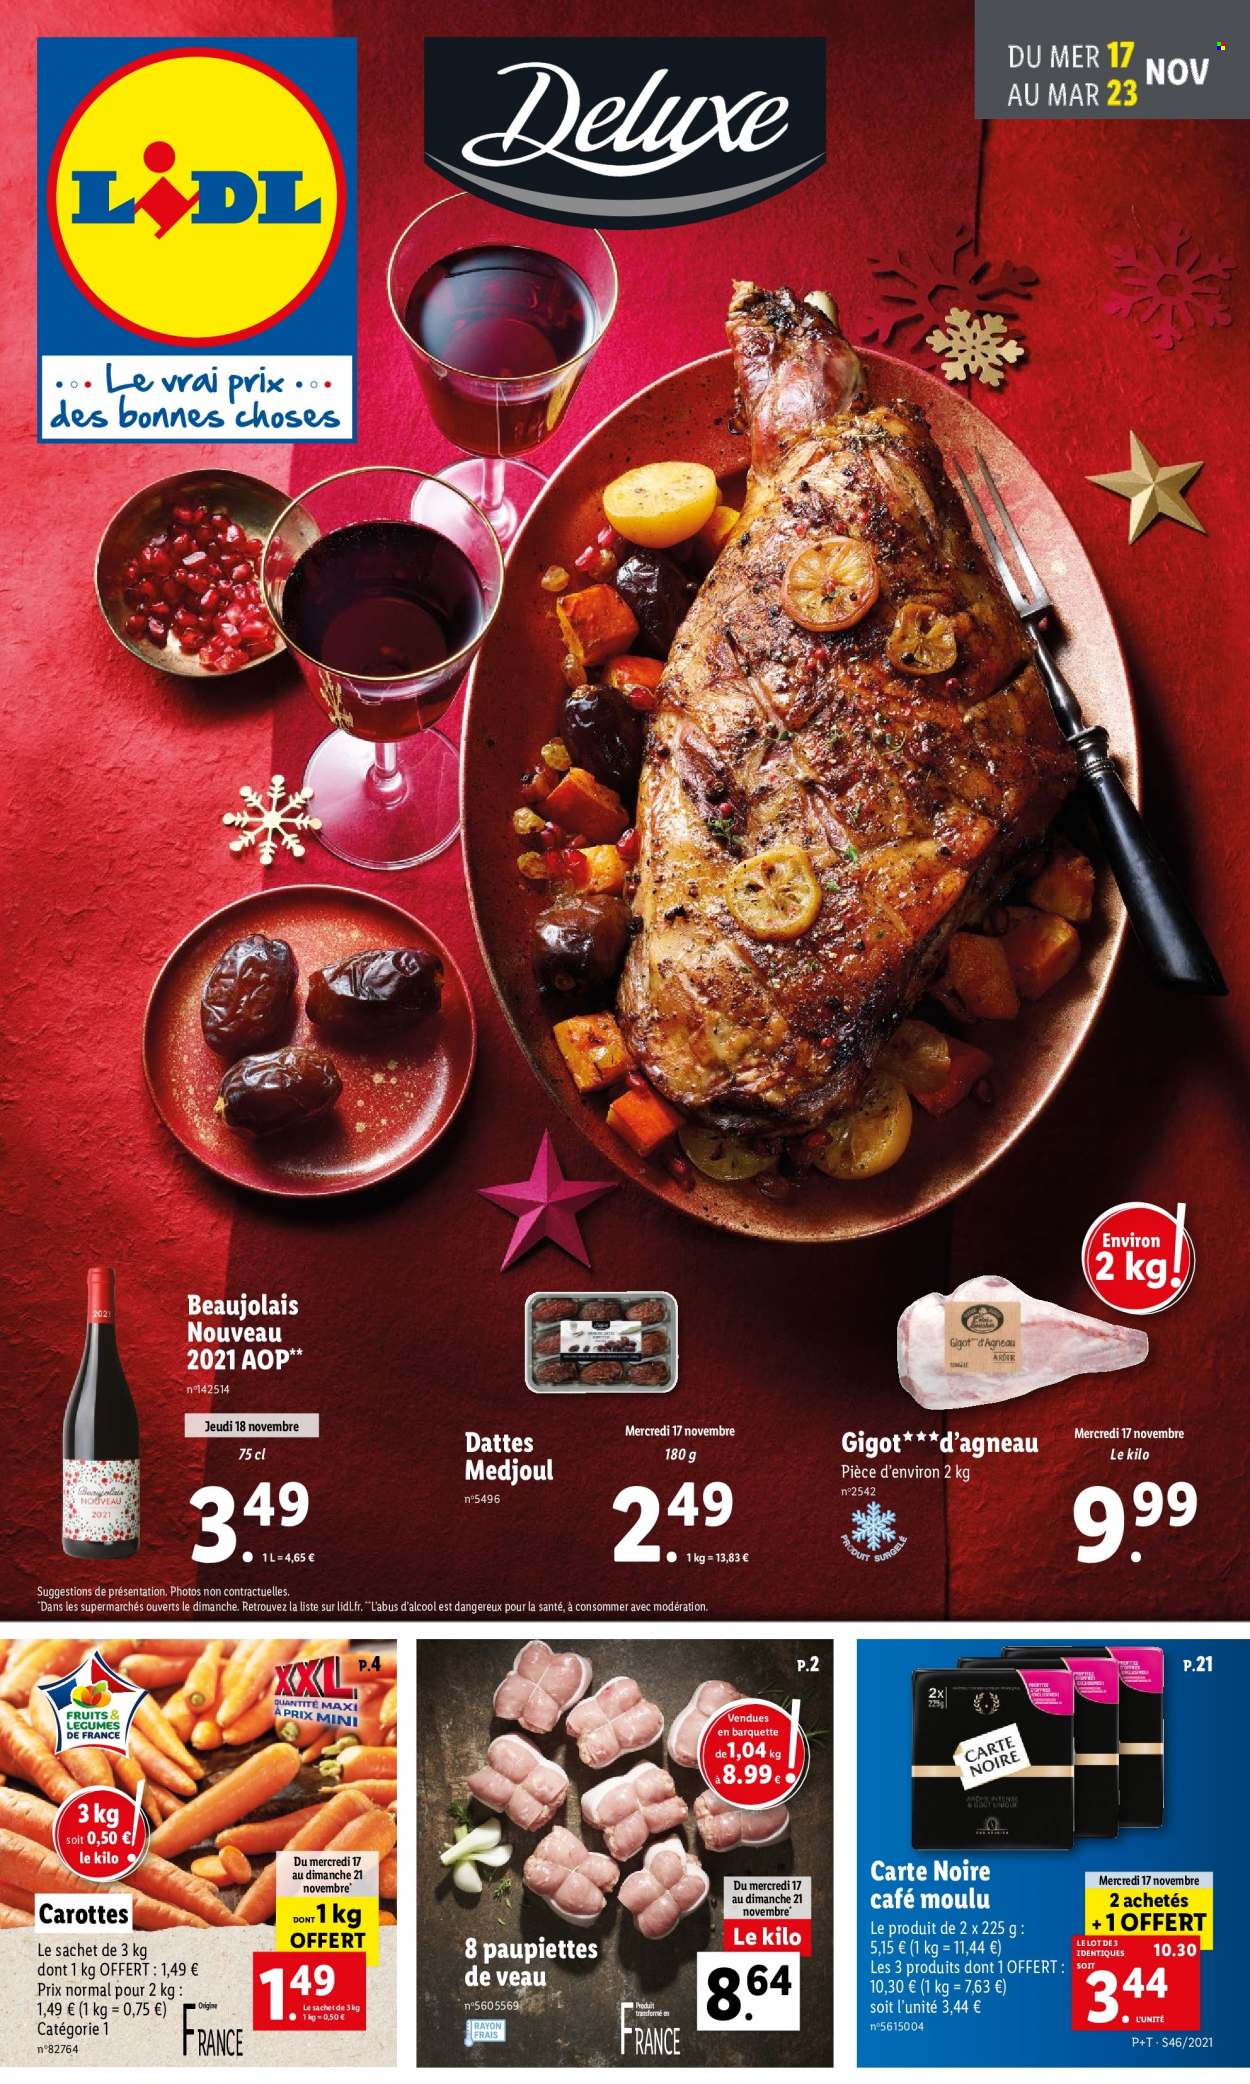 Catalogue Lidl - 17.11.2021 - 23.11.2021. Page 1.